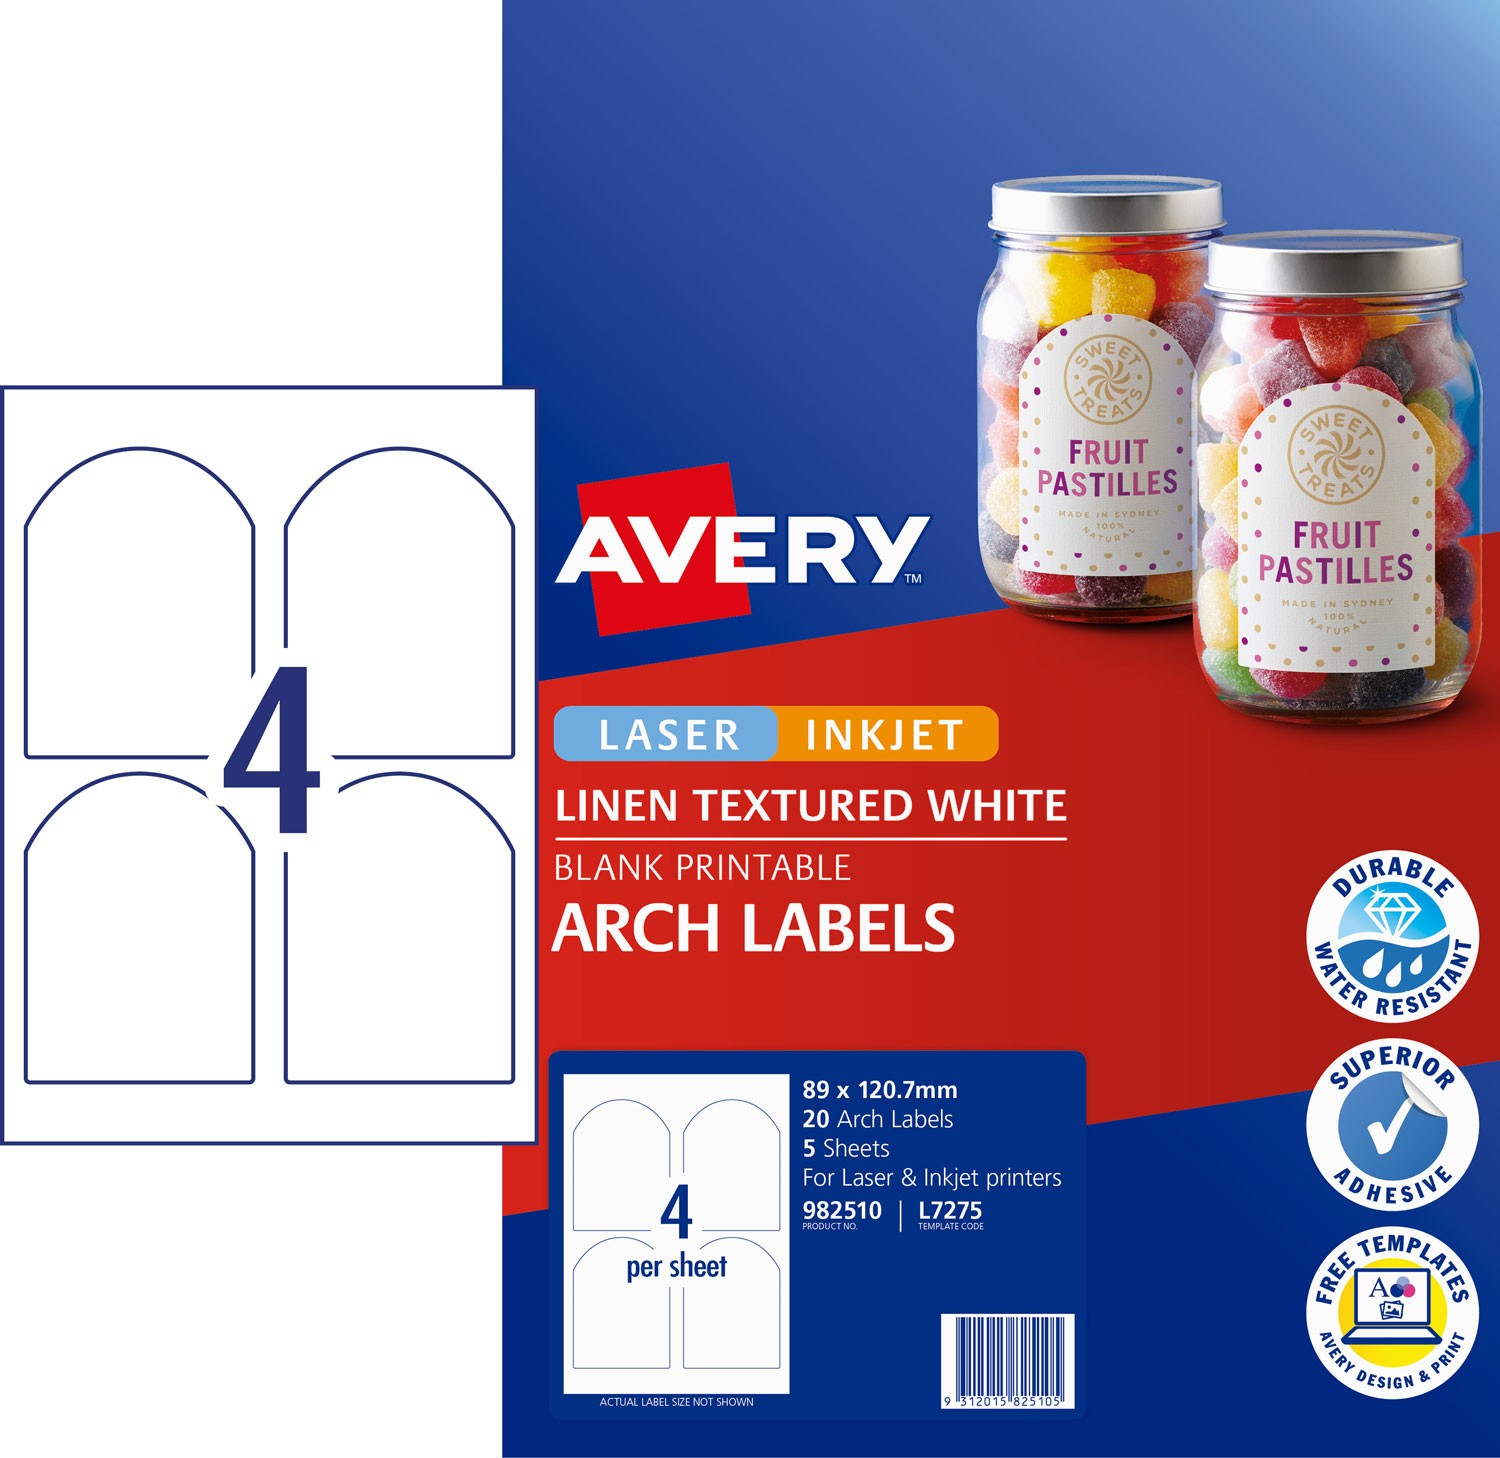 Avery 5384 Template Microsoft Word Free Programs, Utilities and Apps